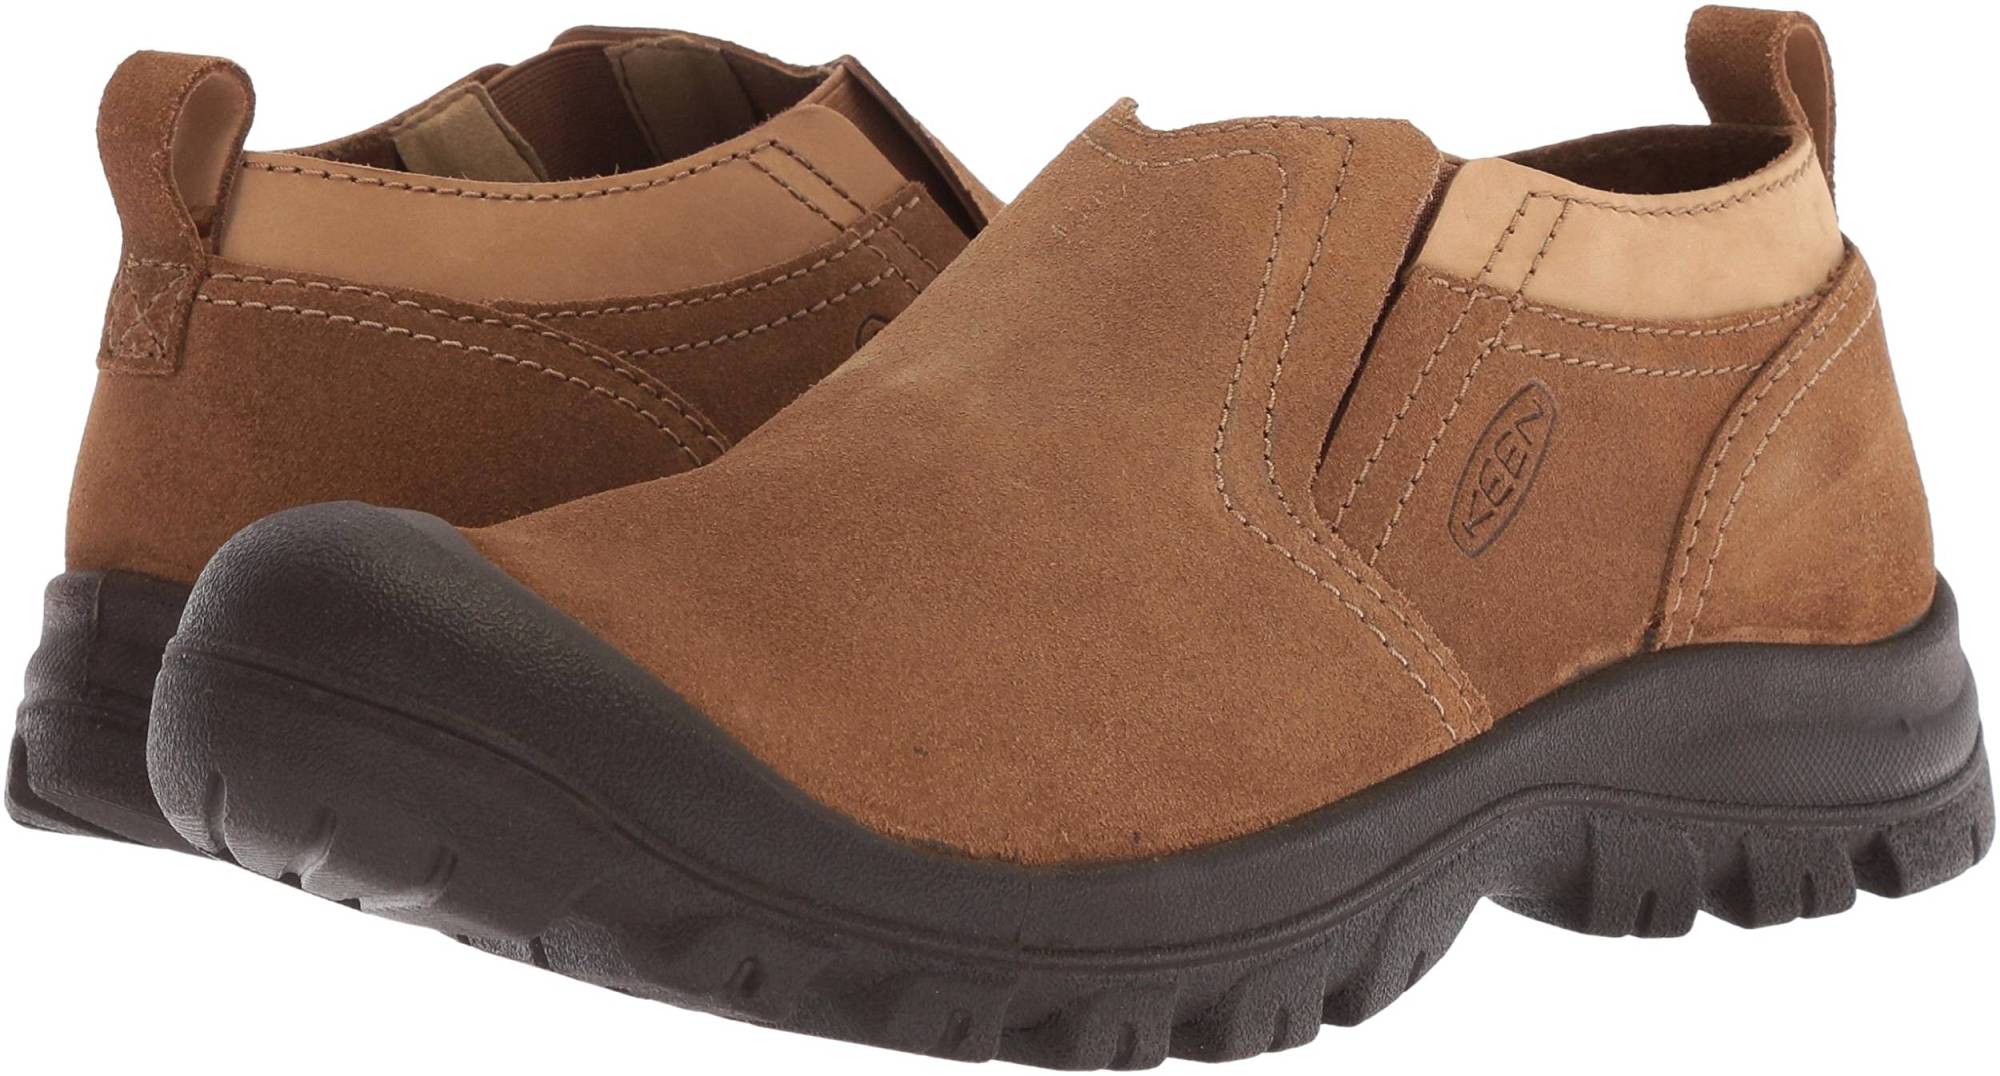 KEEN Grayson Slip-On – Shoes Reviews & Reasons To Buy